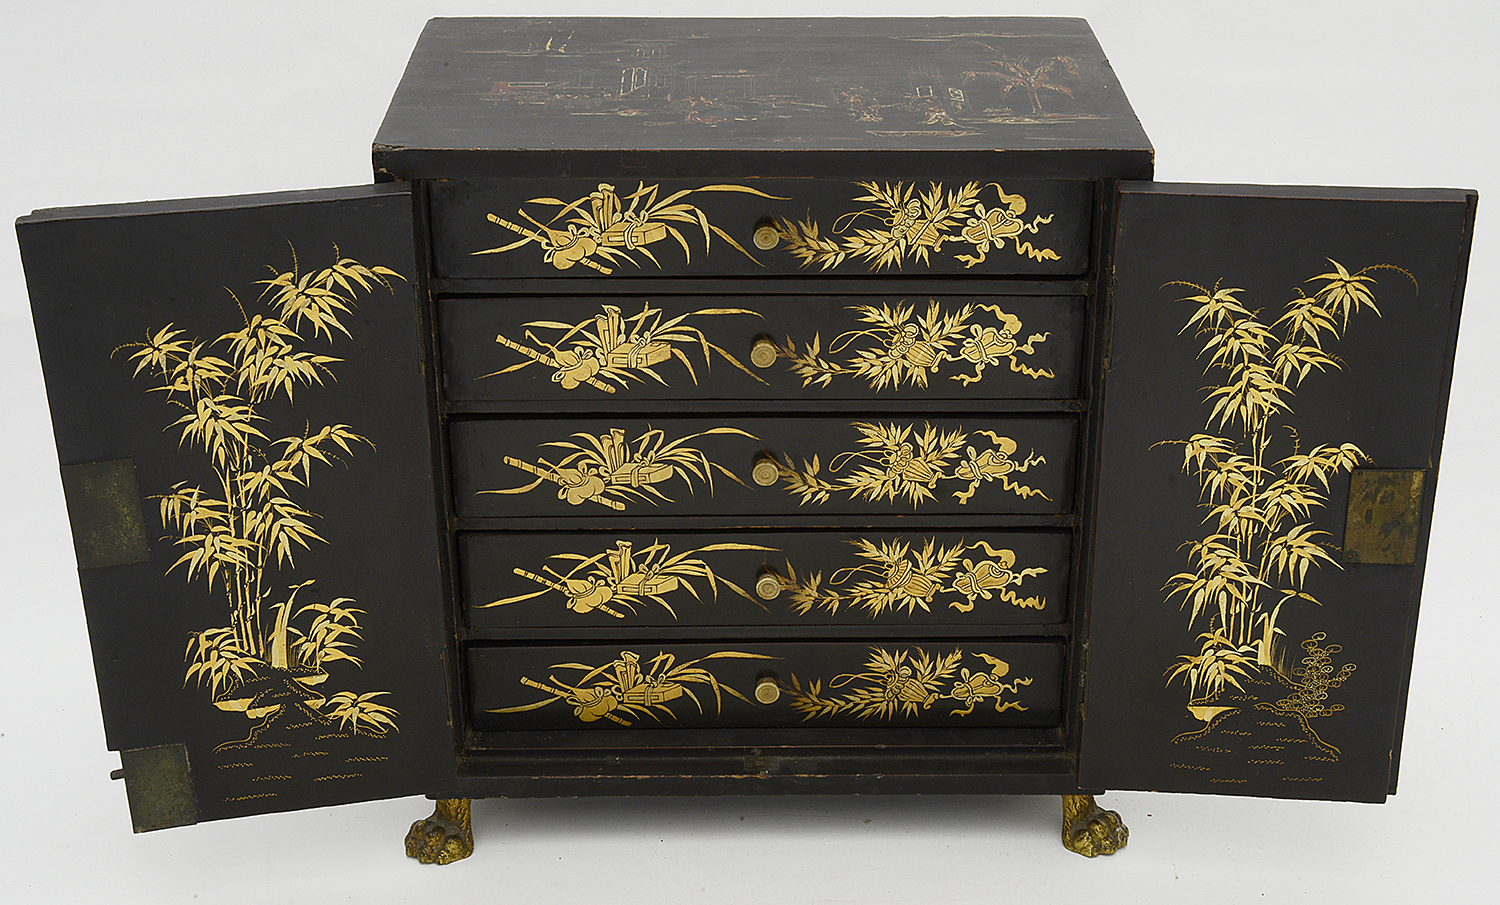 A mid 19th century Chinese export gilt decorated black lacquer table cabinet - Image 2 of 4